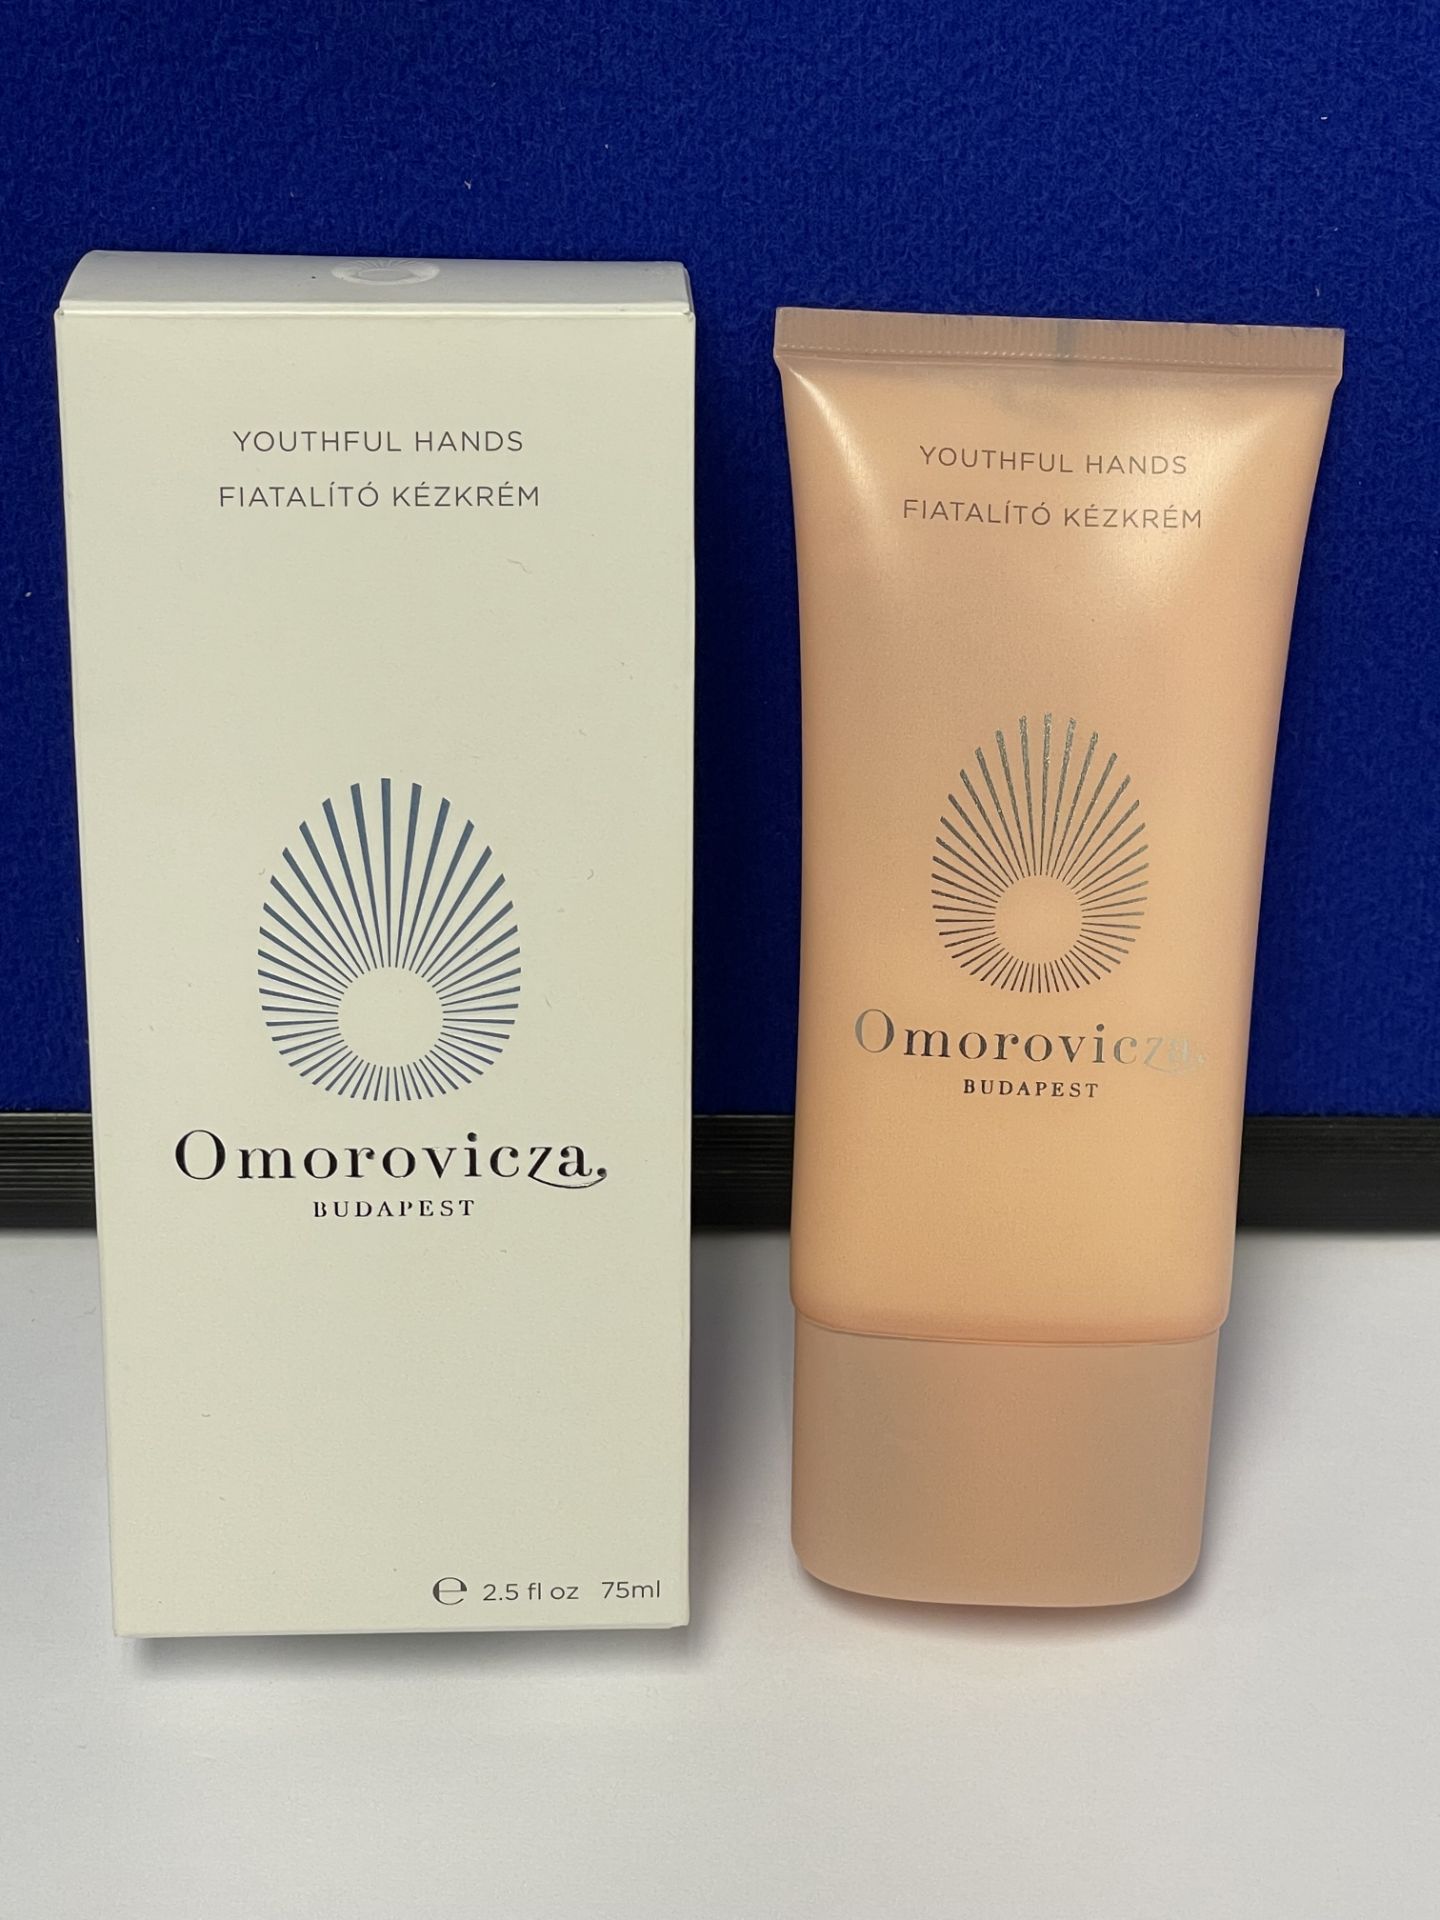 Omorovicza Budapest Youthful Hands | RRP £60.00